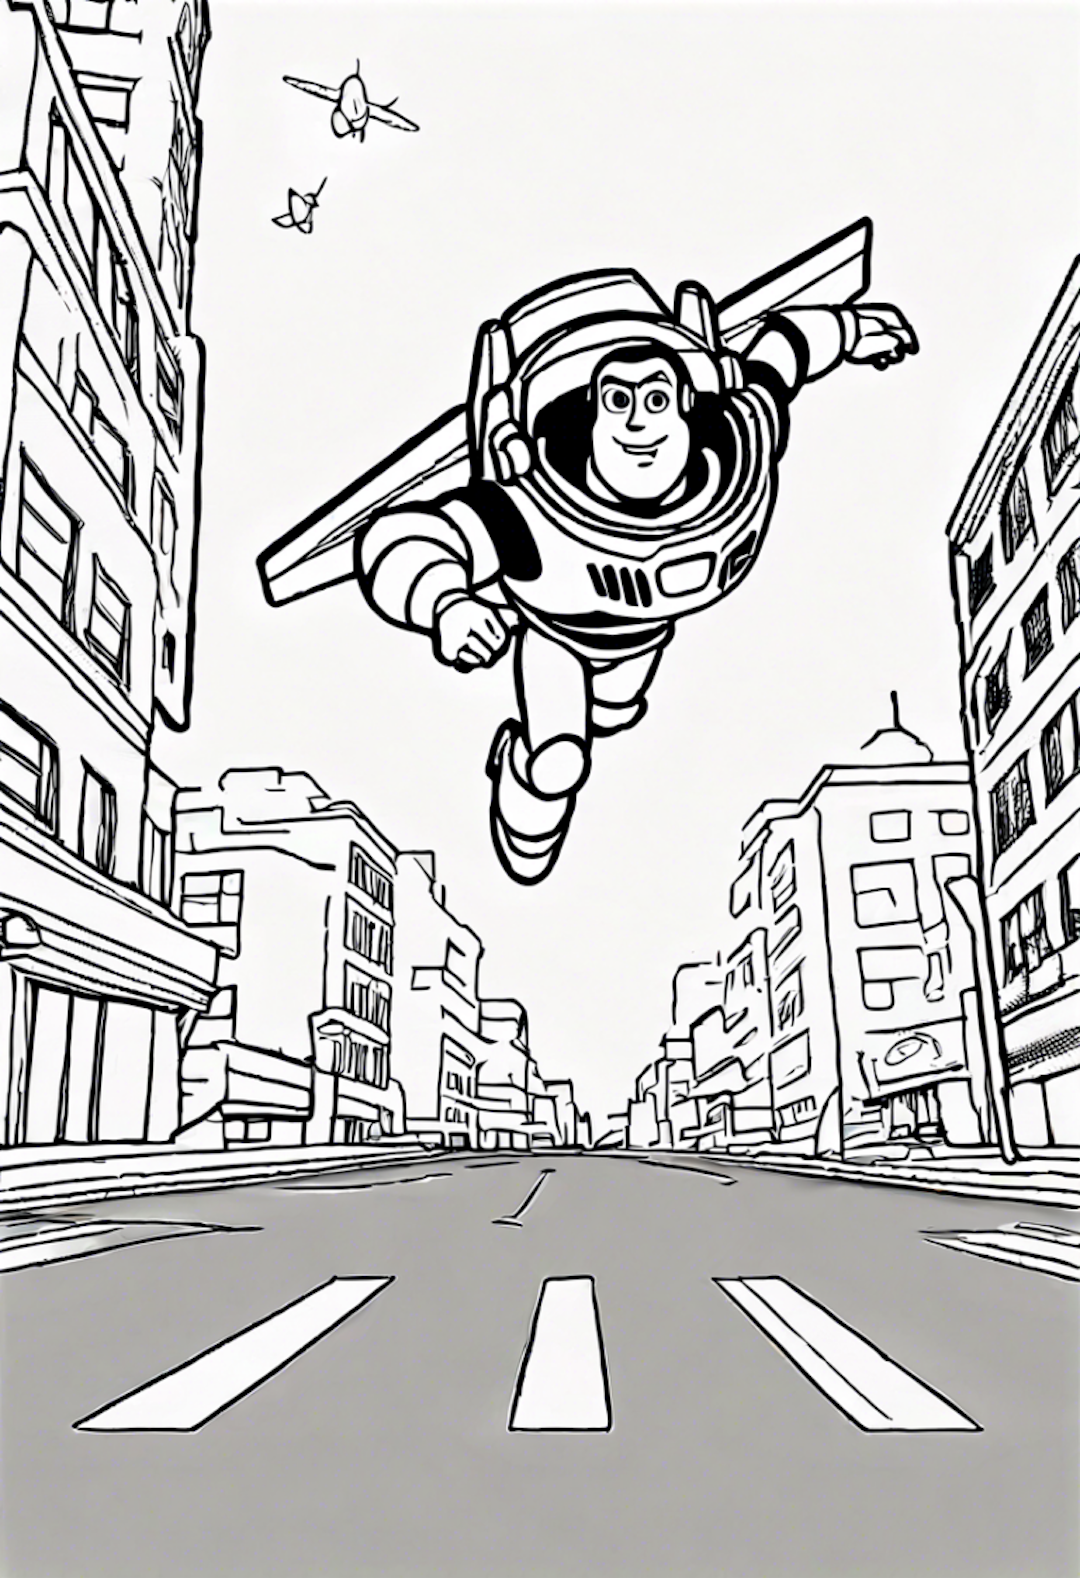 Buzz Lightyear Soaring Above the City coloring pages